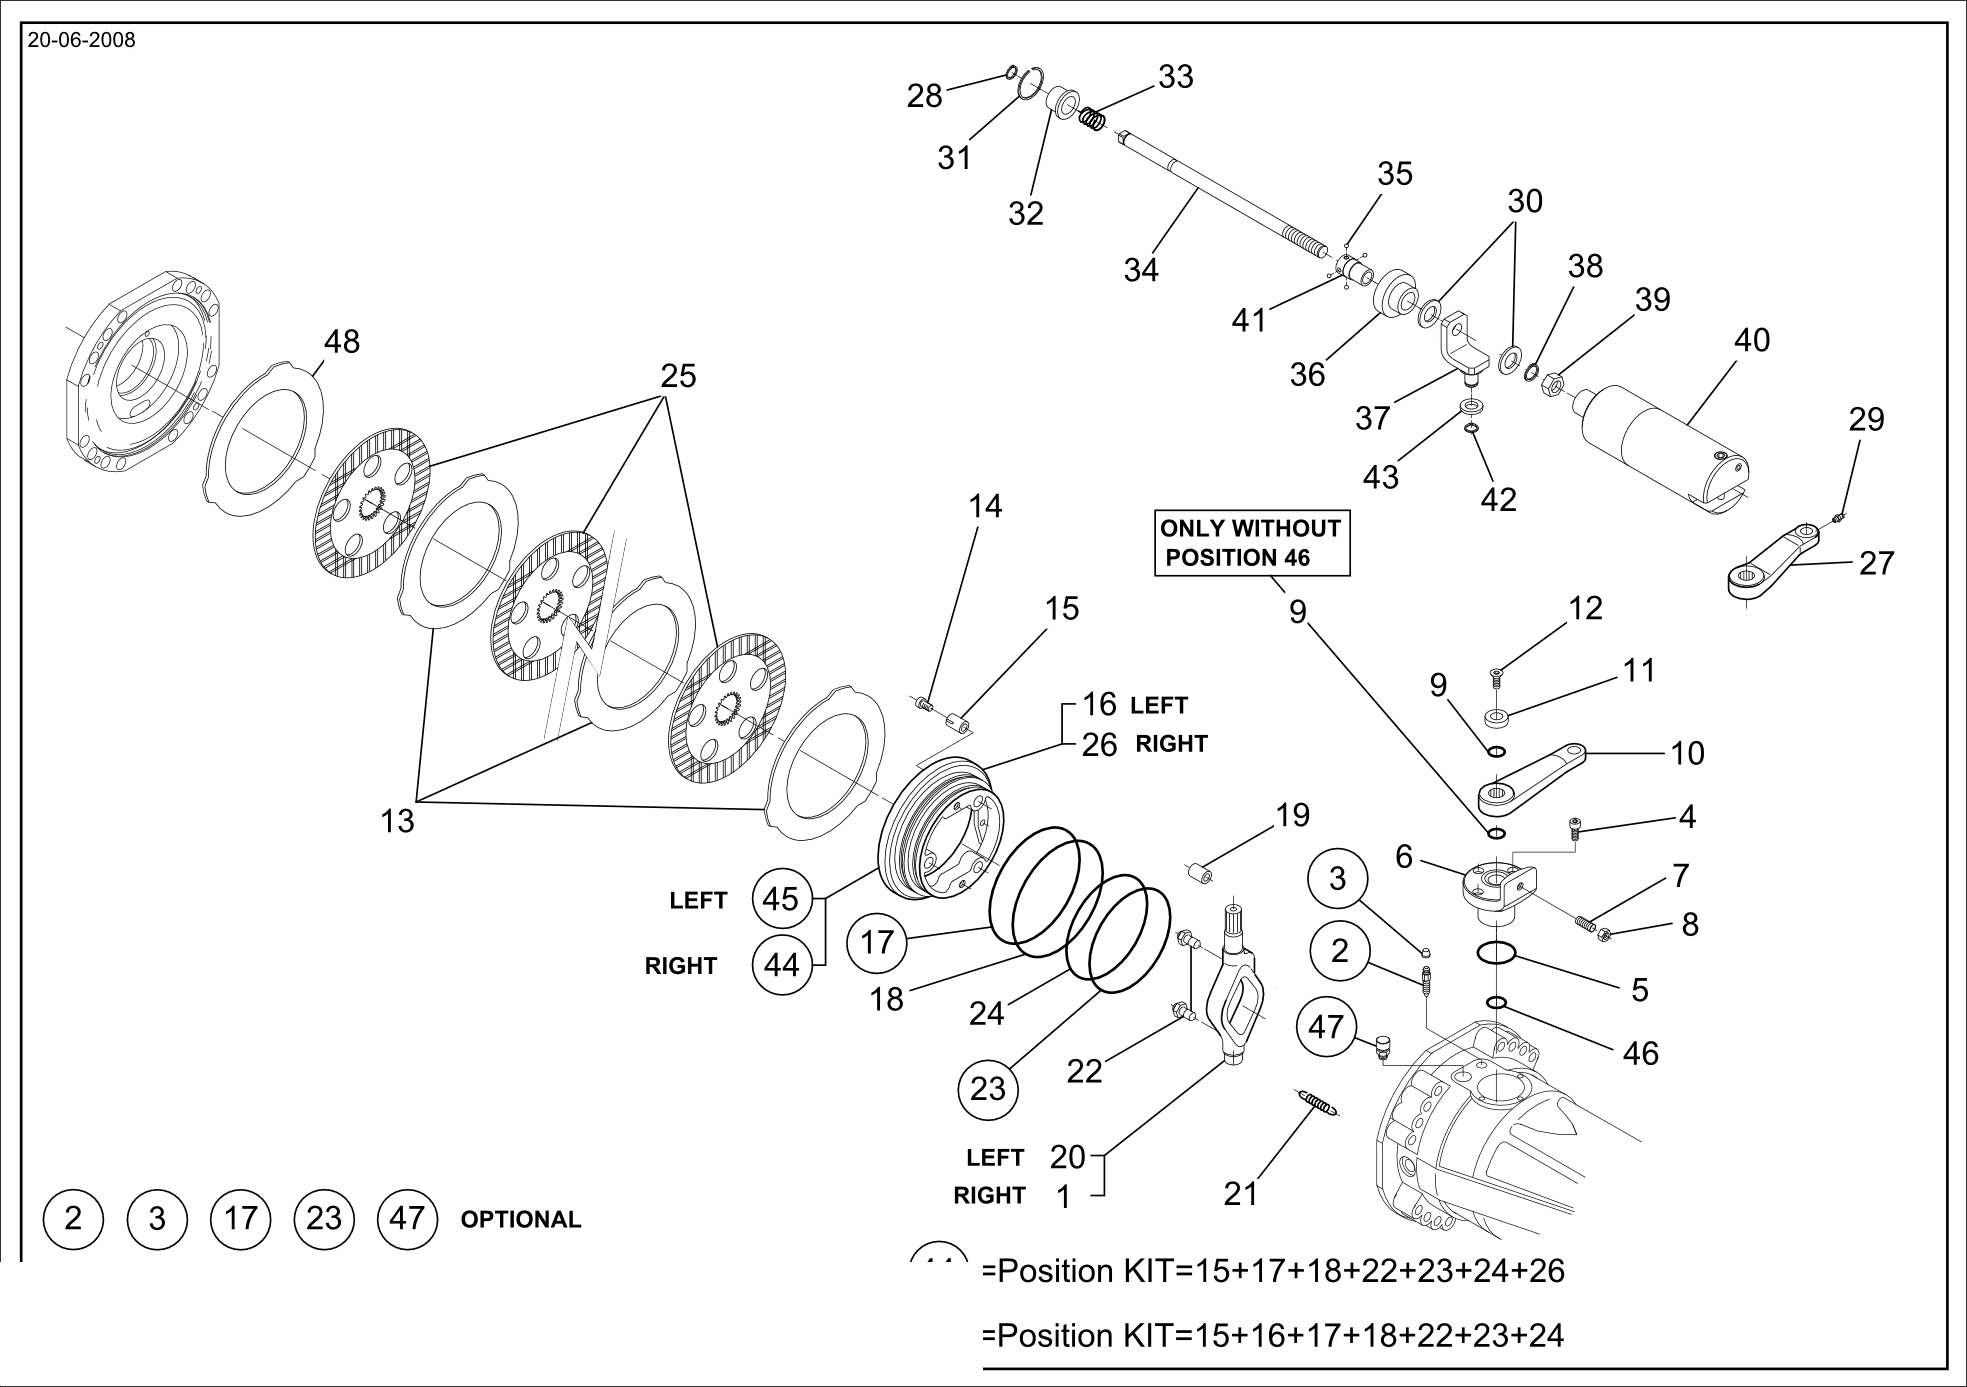 drawing for WEILER 13967C121 - SPRING (figure 3)